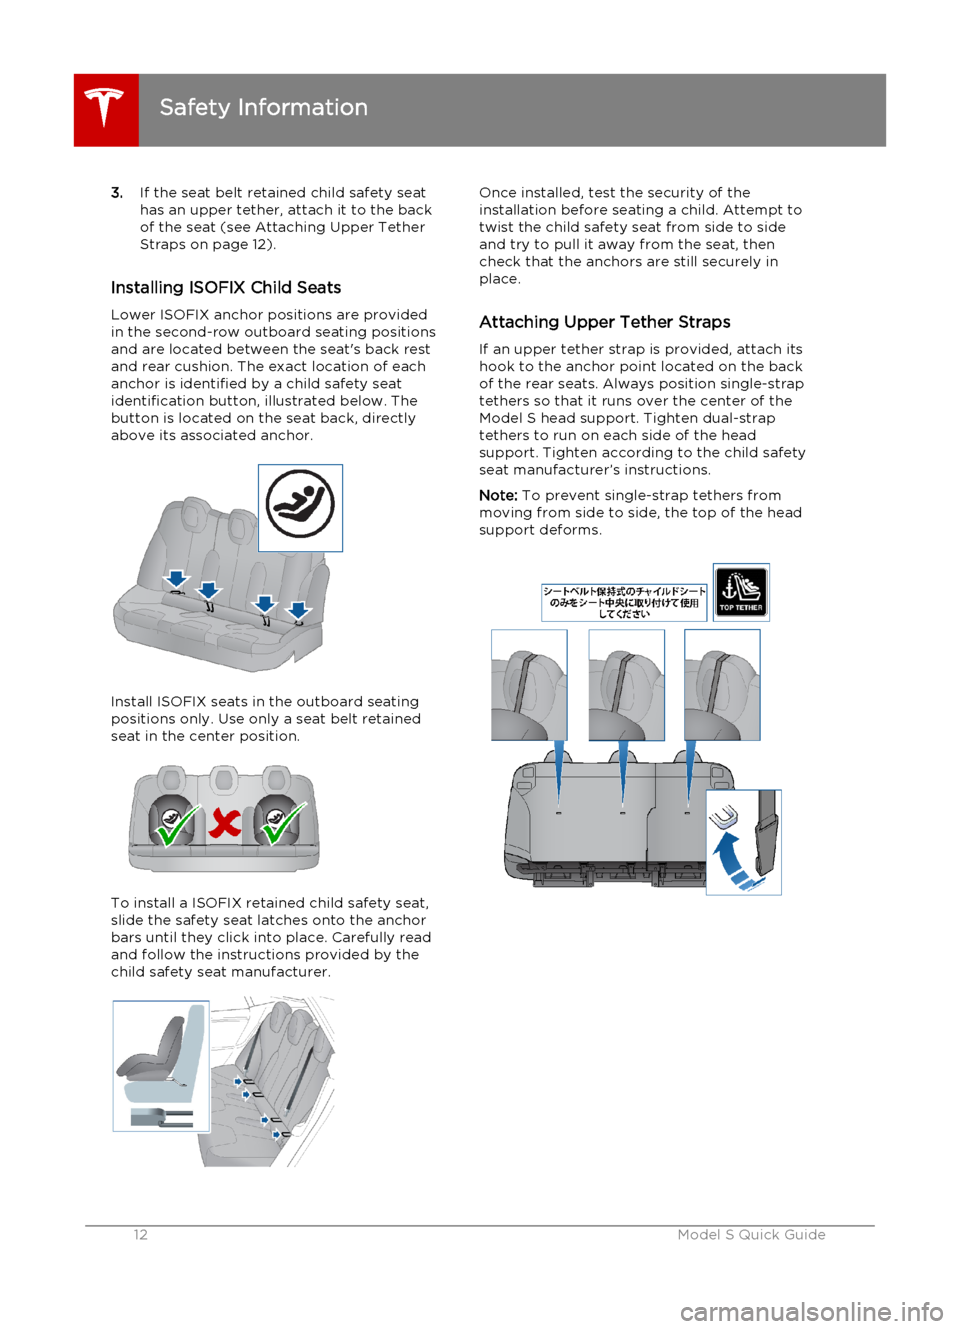 TESLA MODEL S 2015  クイックガイド (in Japanese) 3.If the seat belt retained child safety seat
has an upper tether, attach it to the back of the seat (see Attaching Upper Tether
Straps on page 12).
Installing ISOFIX Child Seats
Lower ISOFIX anchor p